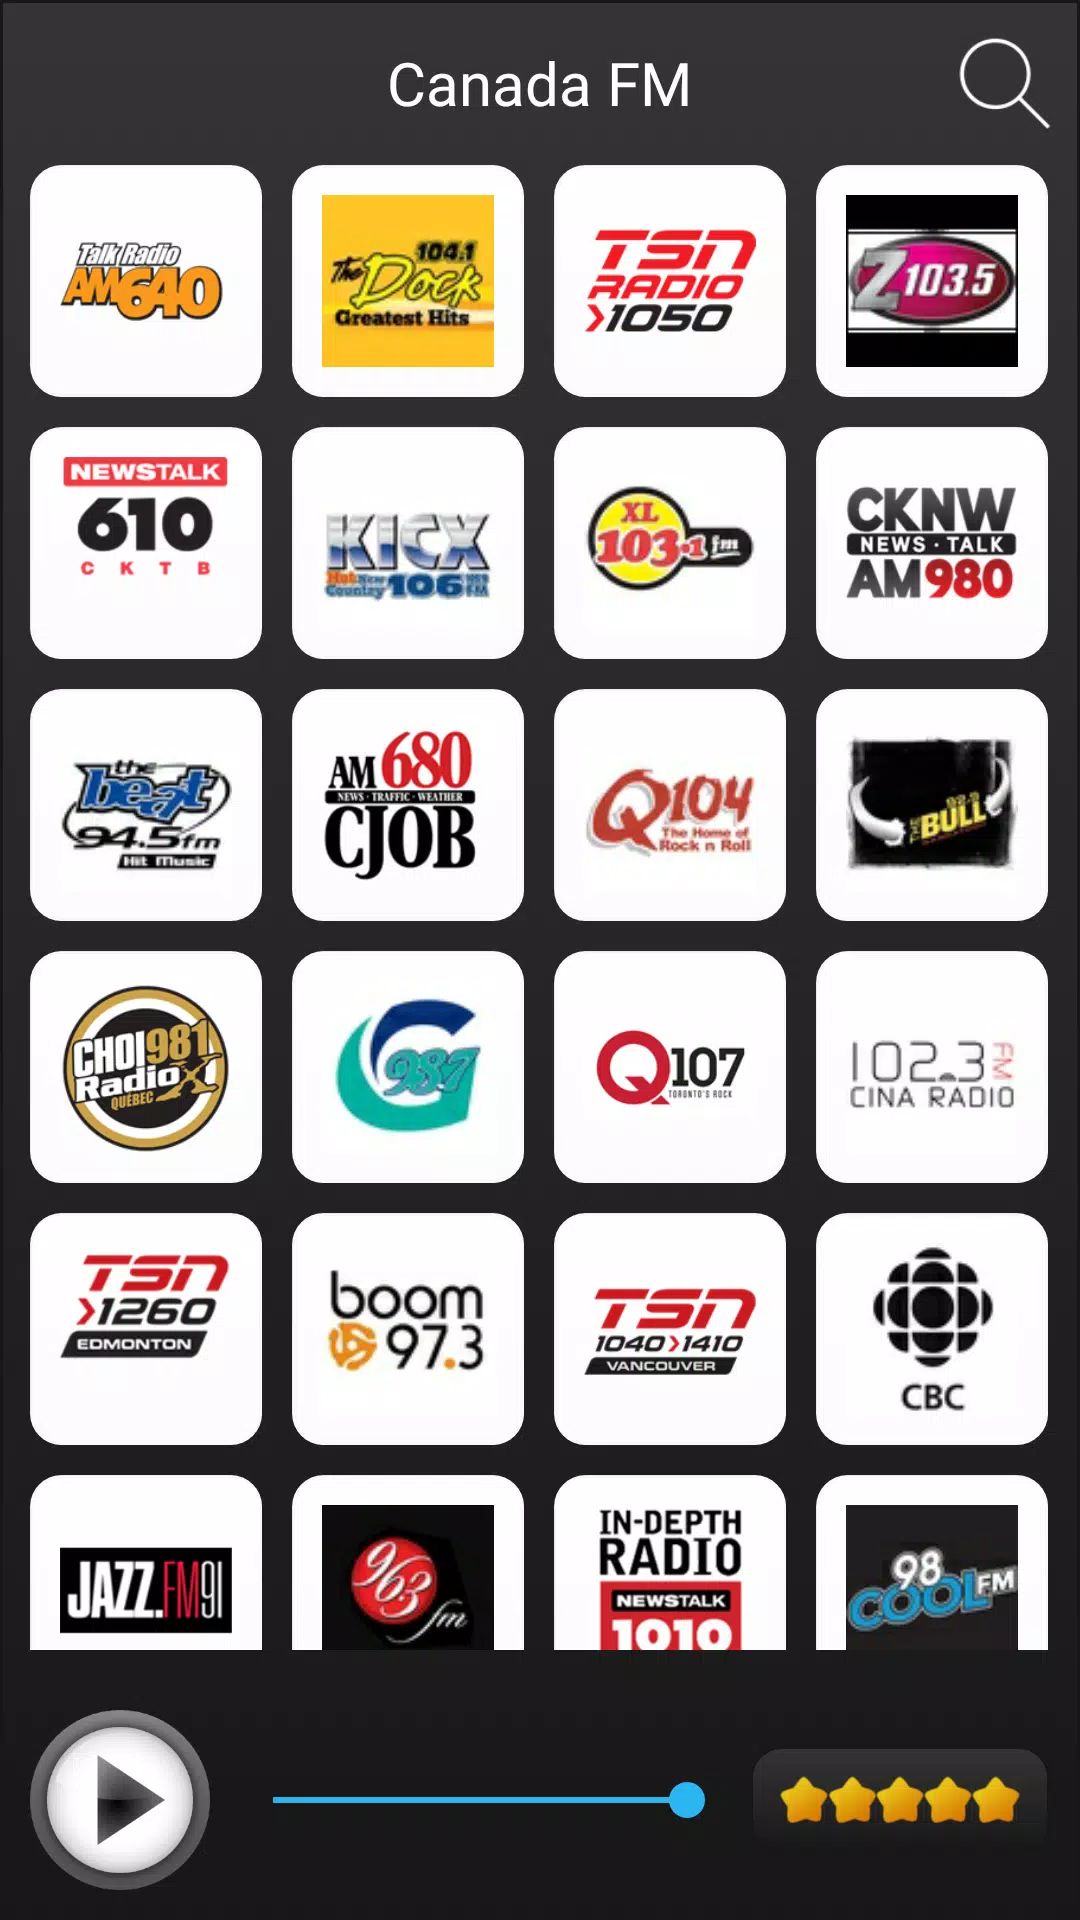 Canada Radio Stations Online - Canada FM AM Music for Android - APK Download